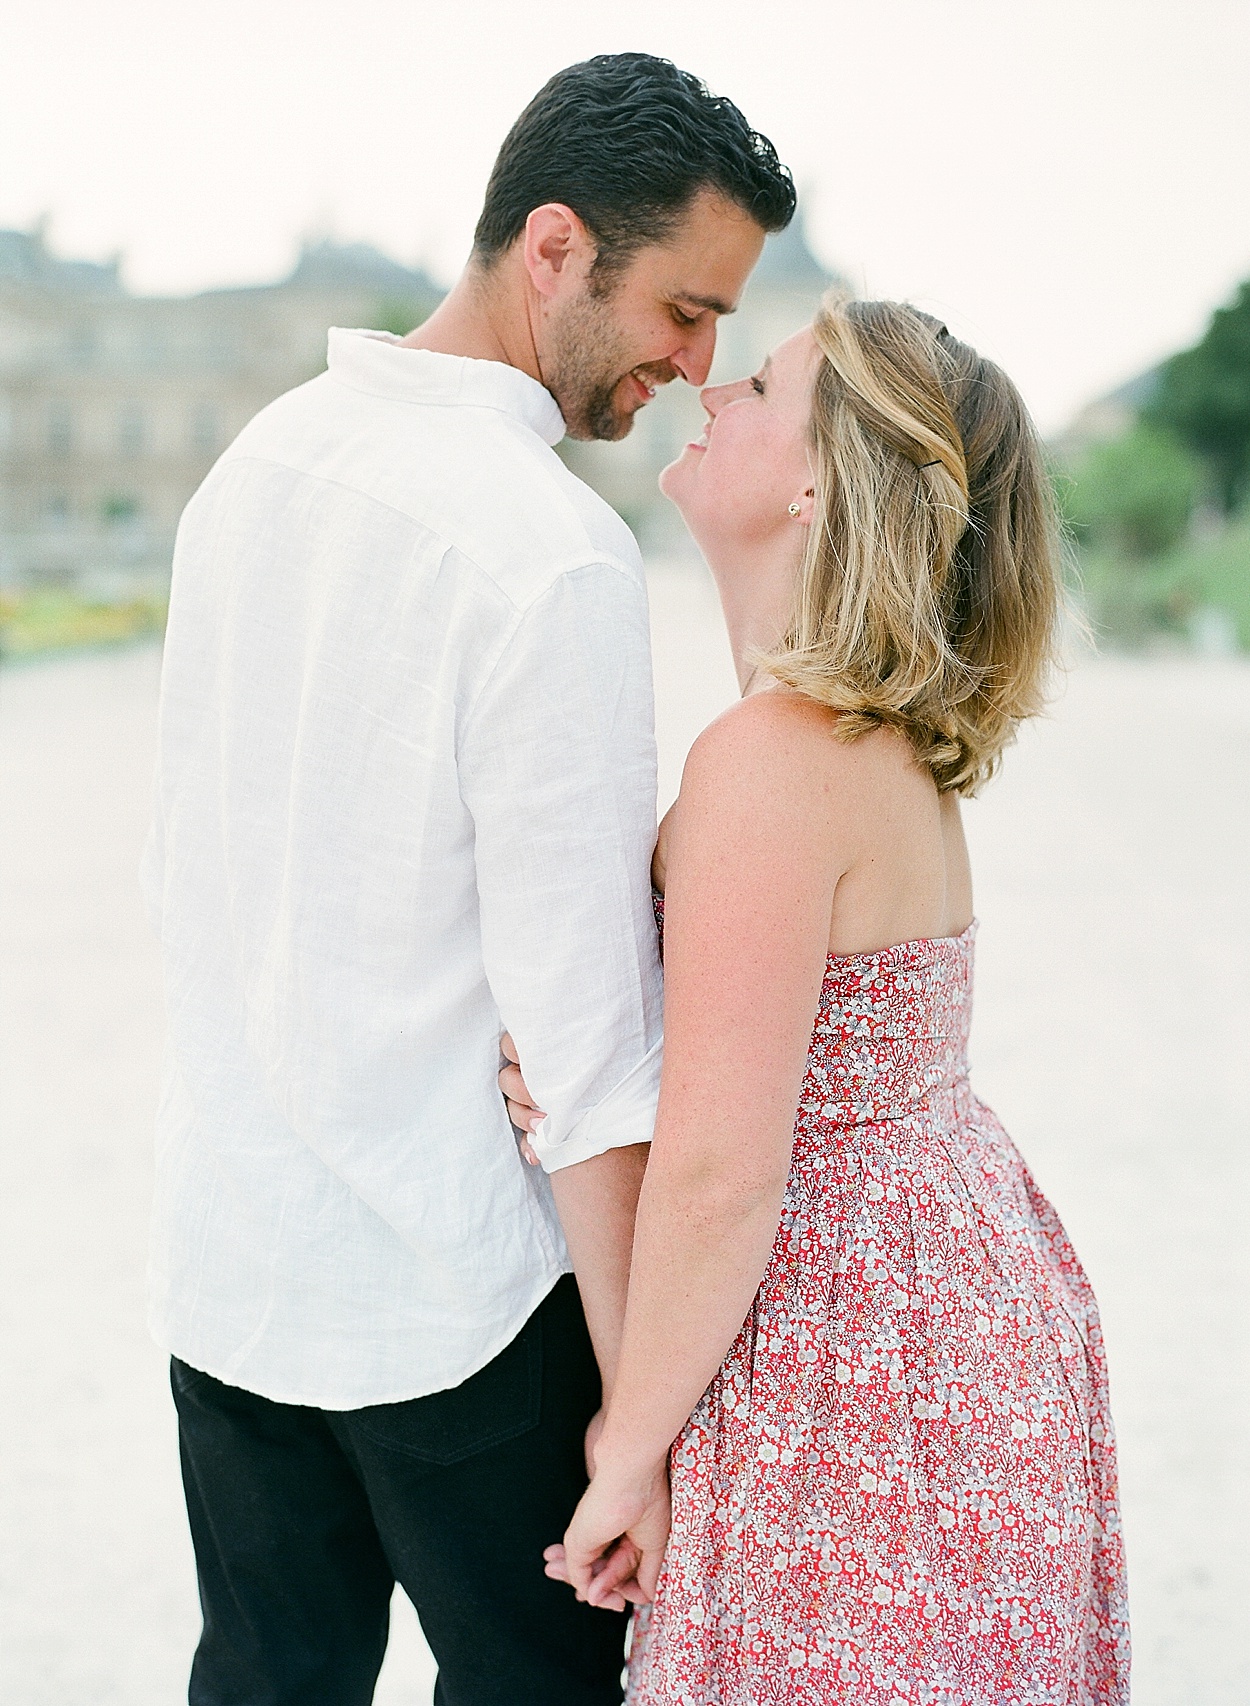 Jardin du Luxembourg anniversary session | Abby Grace Photography